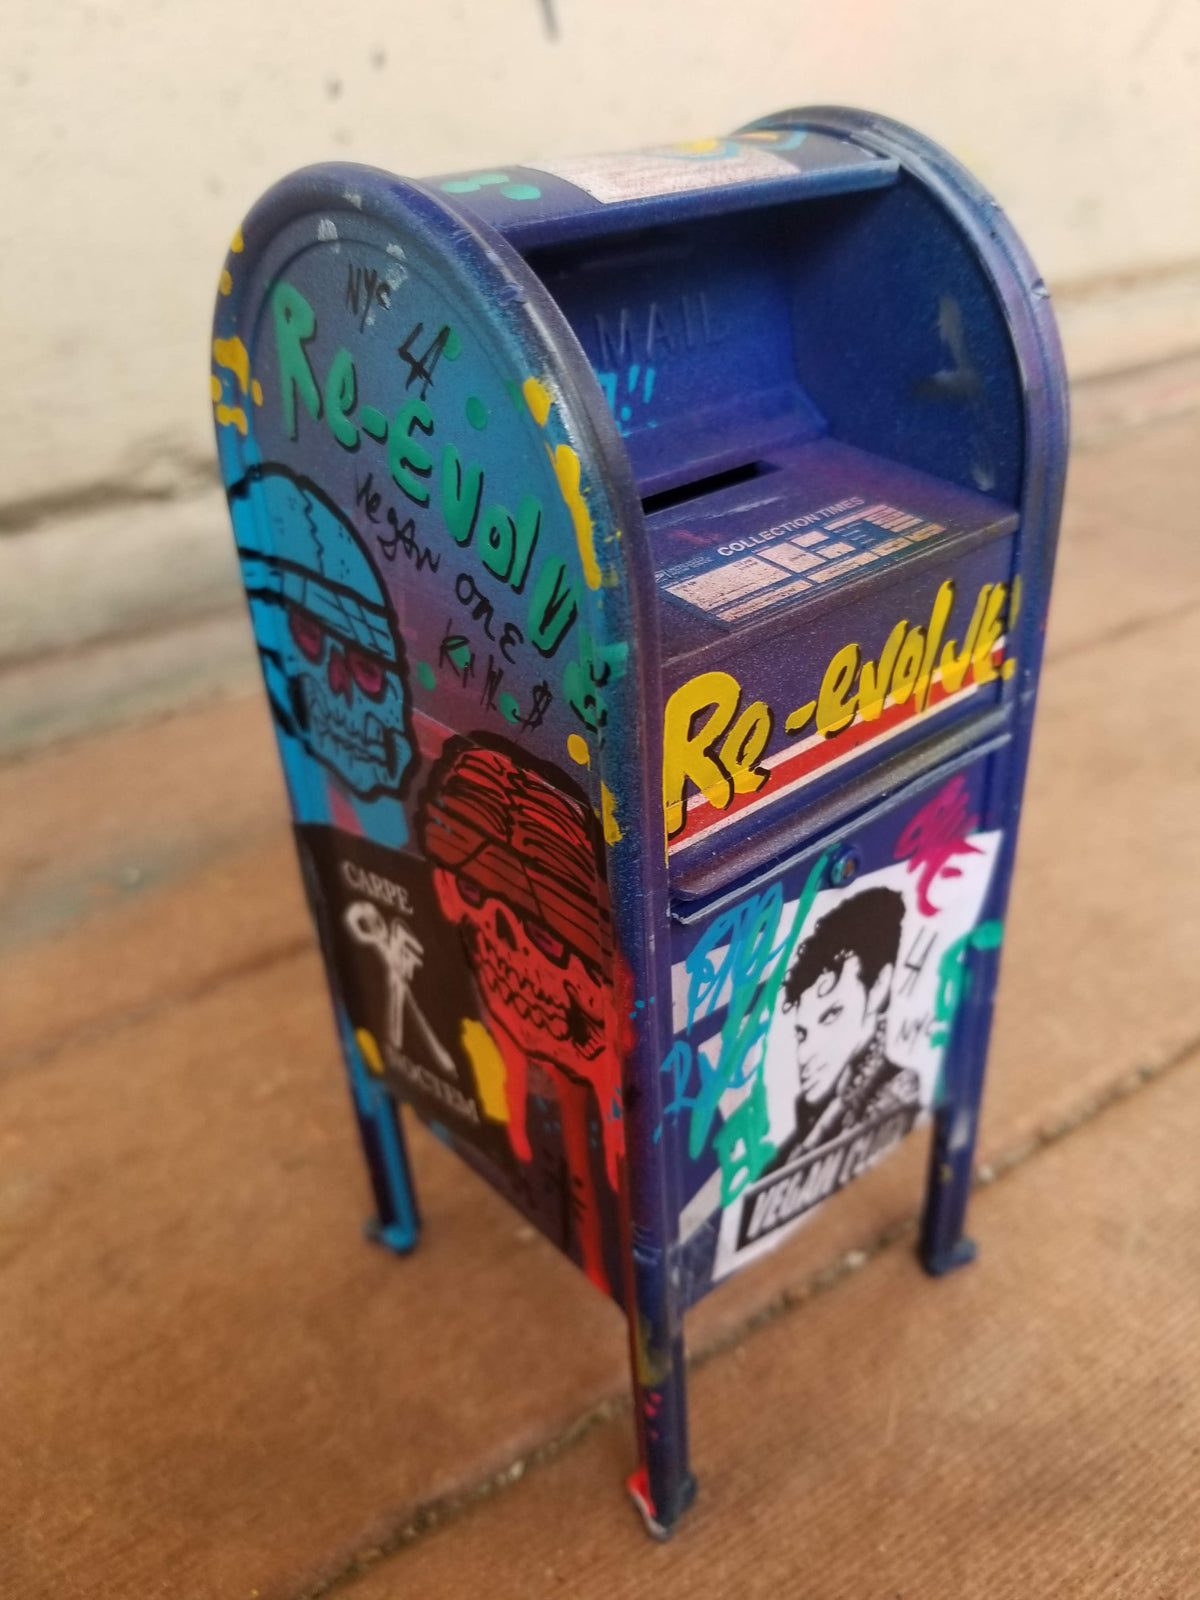 USPS Mailbox Collectible tagged by Vegan Club, art by @_actions_not_words (comes in a box)